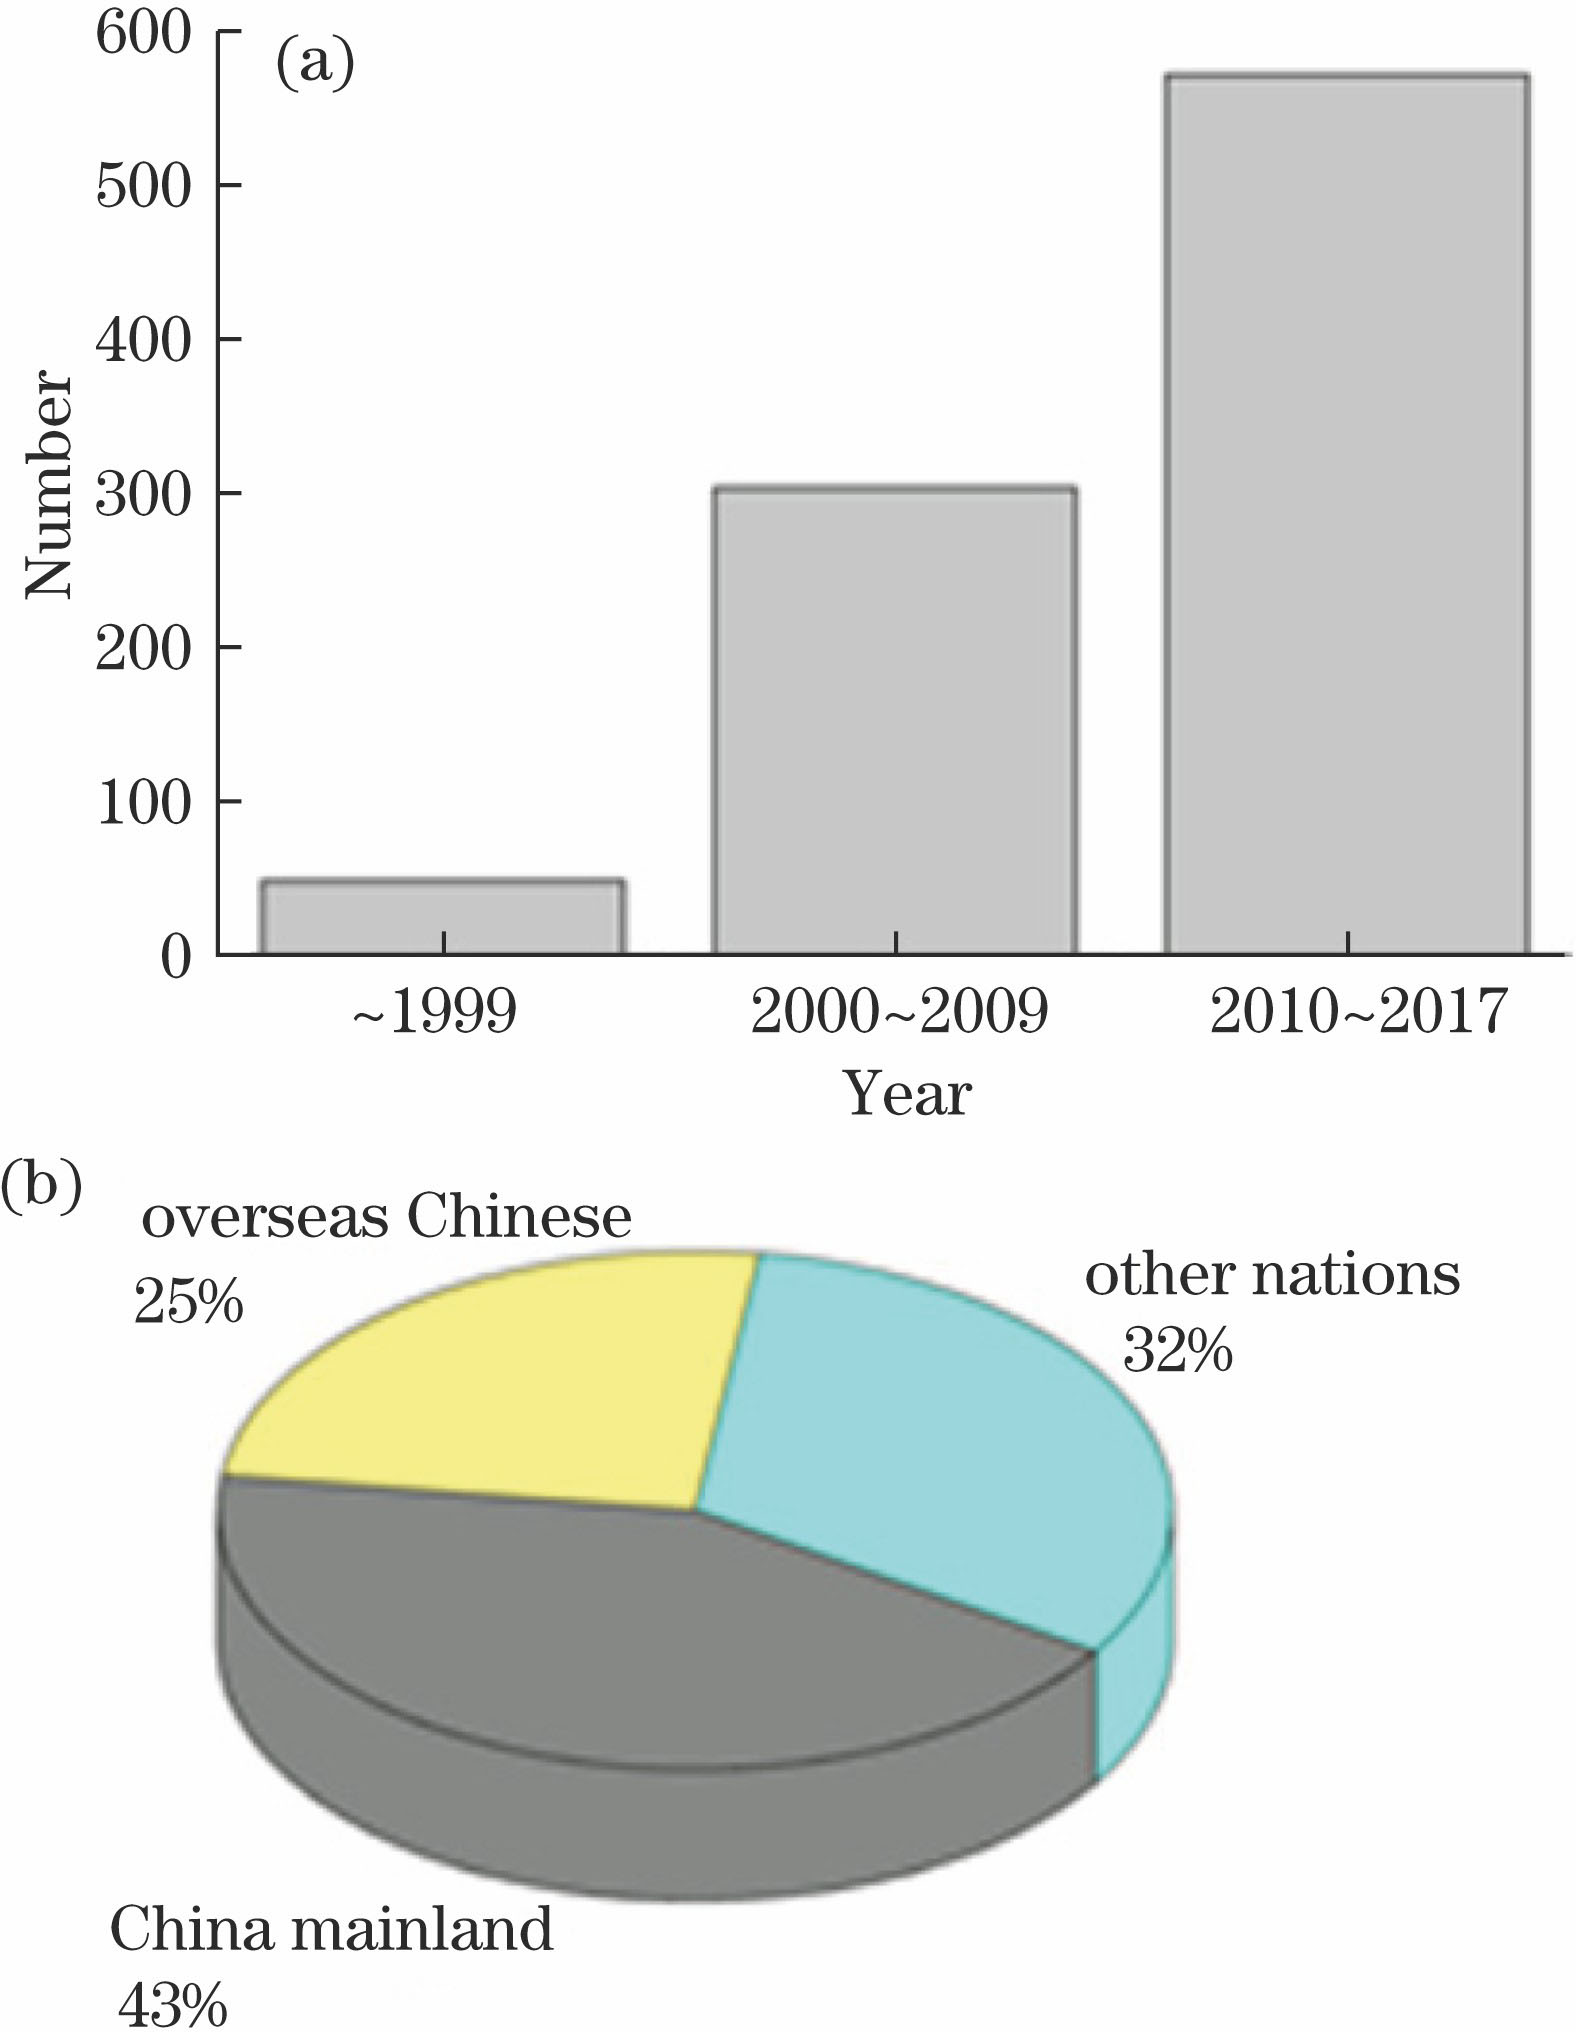 Statistics of optical fiber F-P sensor articles indexed by SCI, EI, and CNKI. (a) Number of the articles in recent years; (b) district statistics of the first author